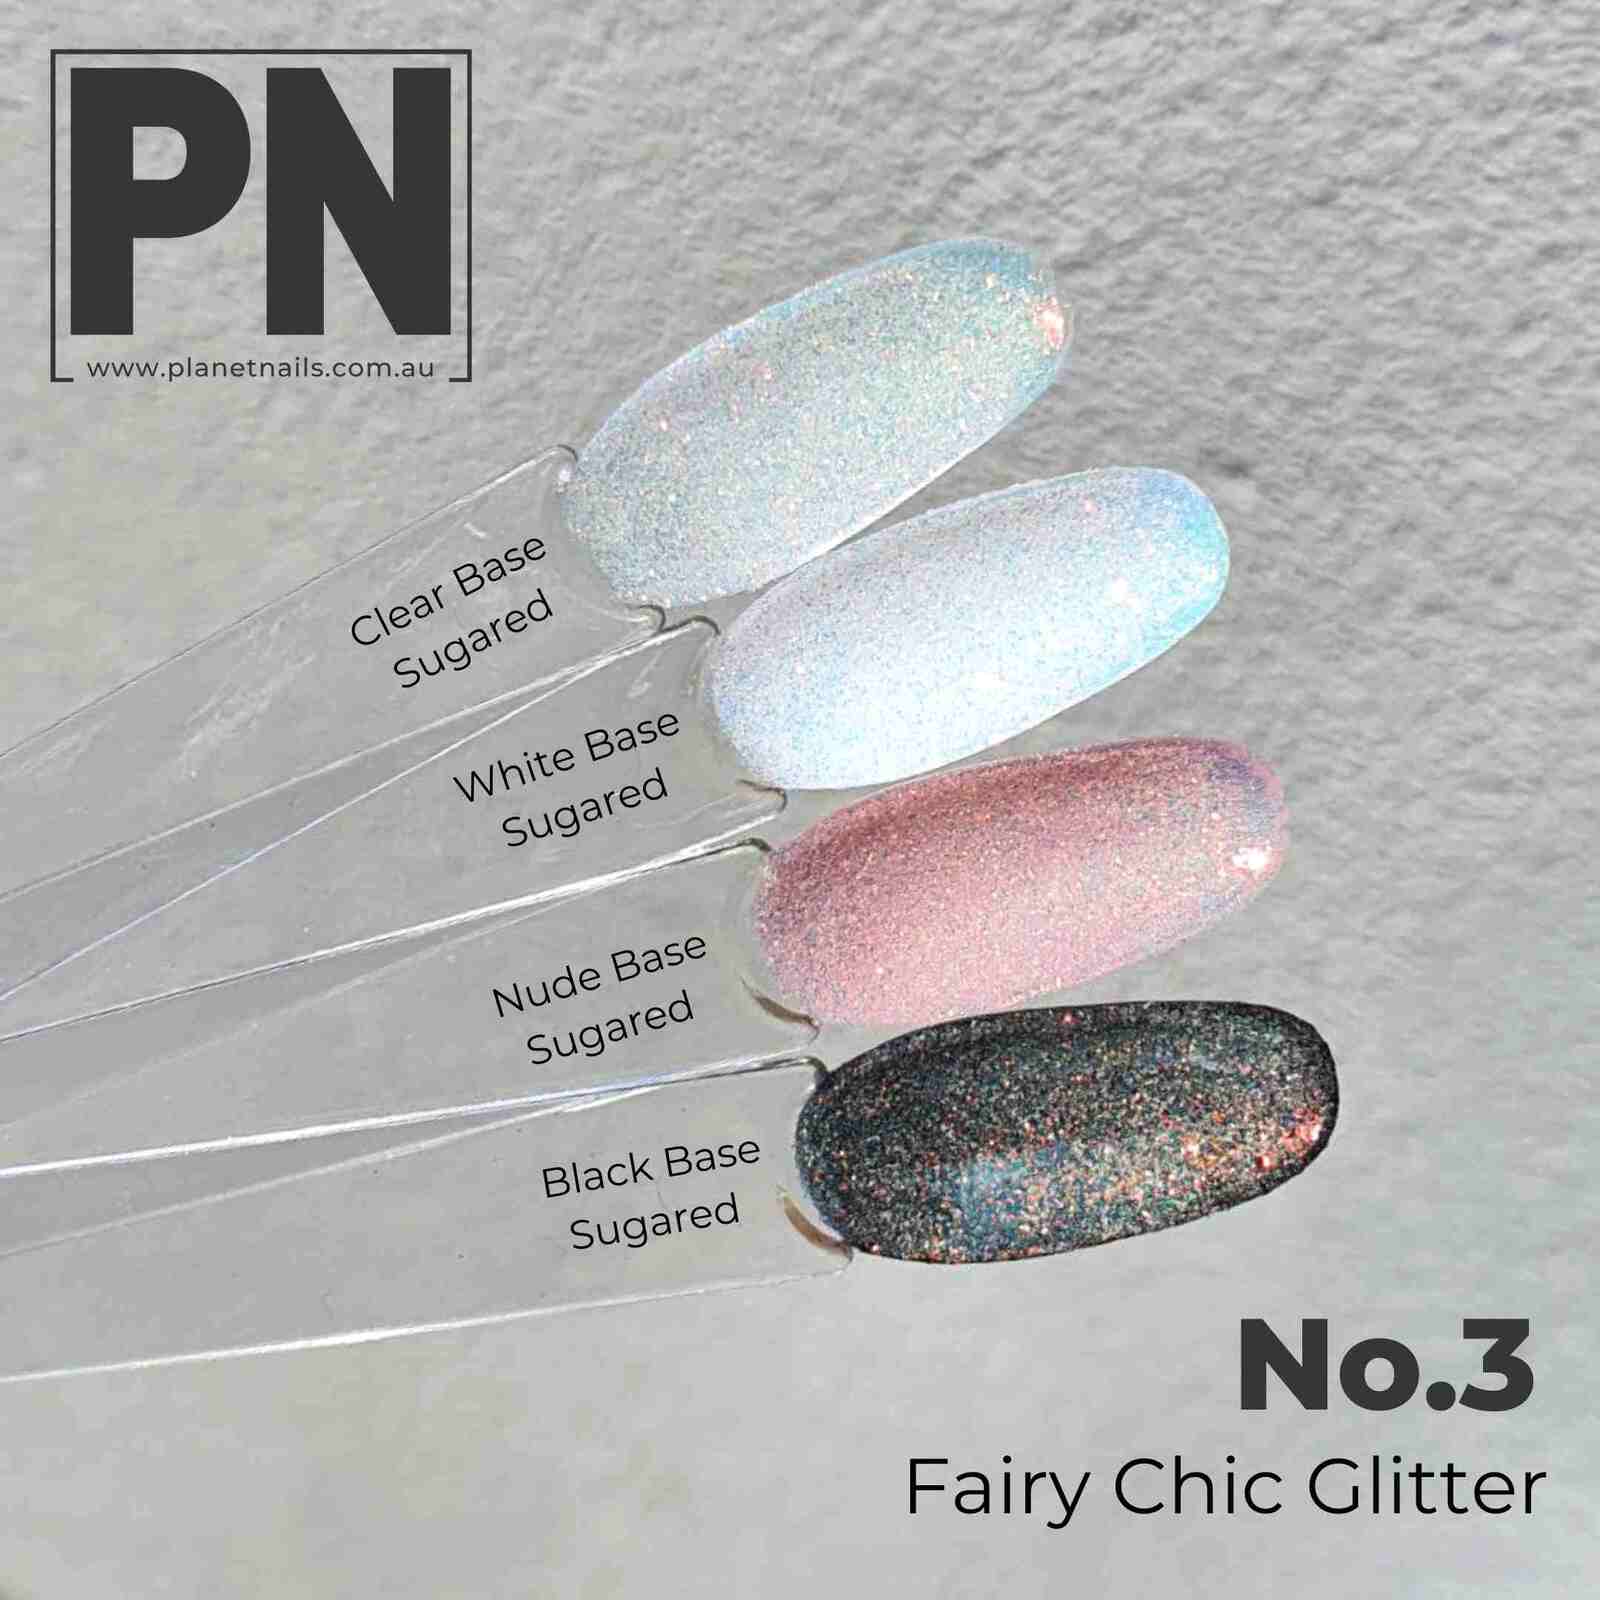 Buy Fairy Chic Glitter #3 Online - Planet Nails